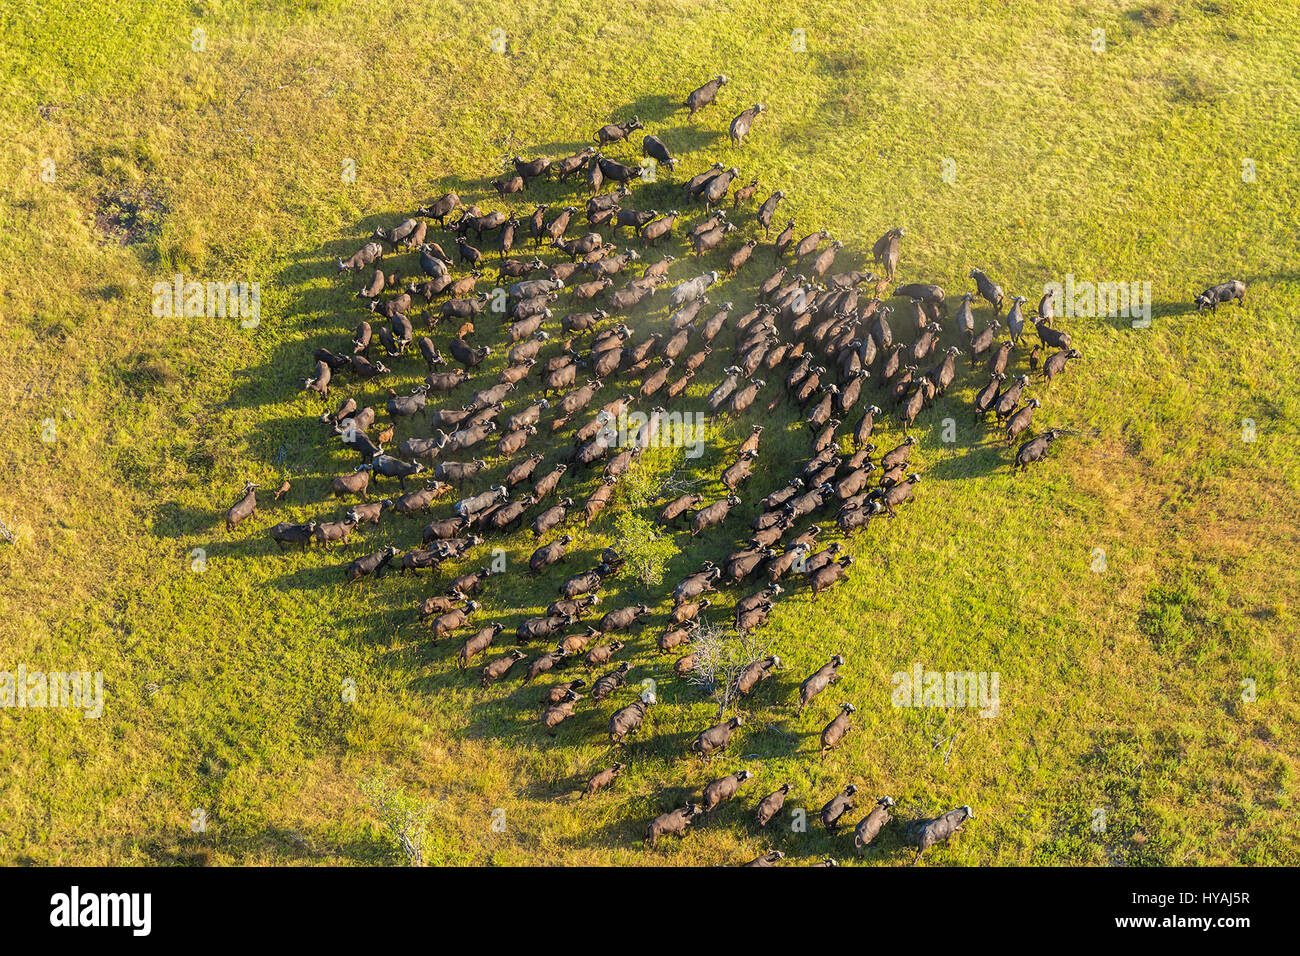 OKAVANGO DELTA, BOTSWANA: BIG GAME animals have been made to look like tiny insects in these awe-inspiring aerial shots taken by a British photographer. From swirling wildebeest to a tower or herd of giraffes marching along single file, happy hippos having a swim and a solo elephant wanting a bit of alone time, these pictures give a different perspective on ‘big game’ life on the Okavango Delta, Botswana. London-born photographer Peter Adams (56) was able to snap these amazing shots by leaning out of a Robinson R44 helicopter with the door removed for greater access. Stock Photo